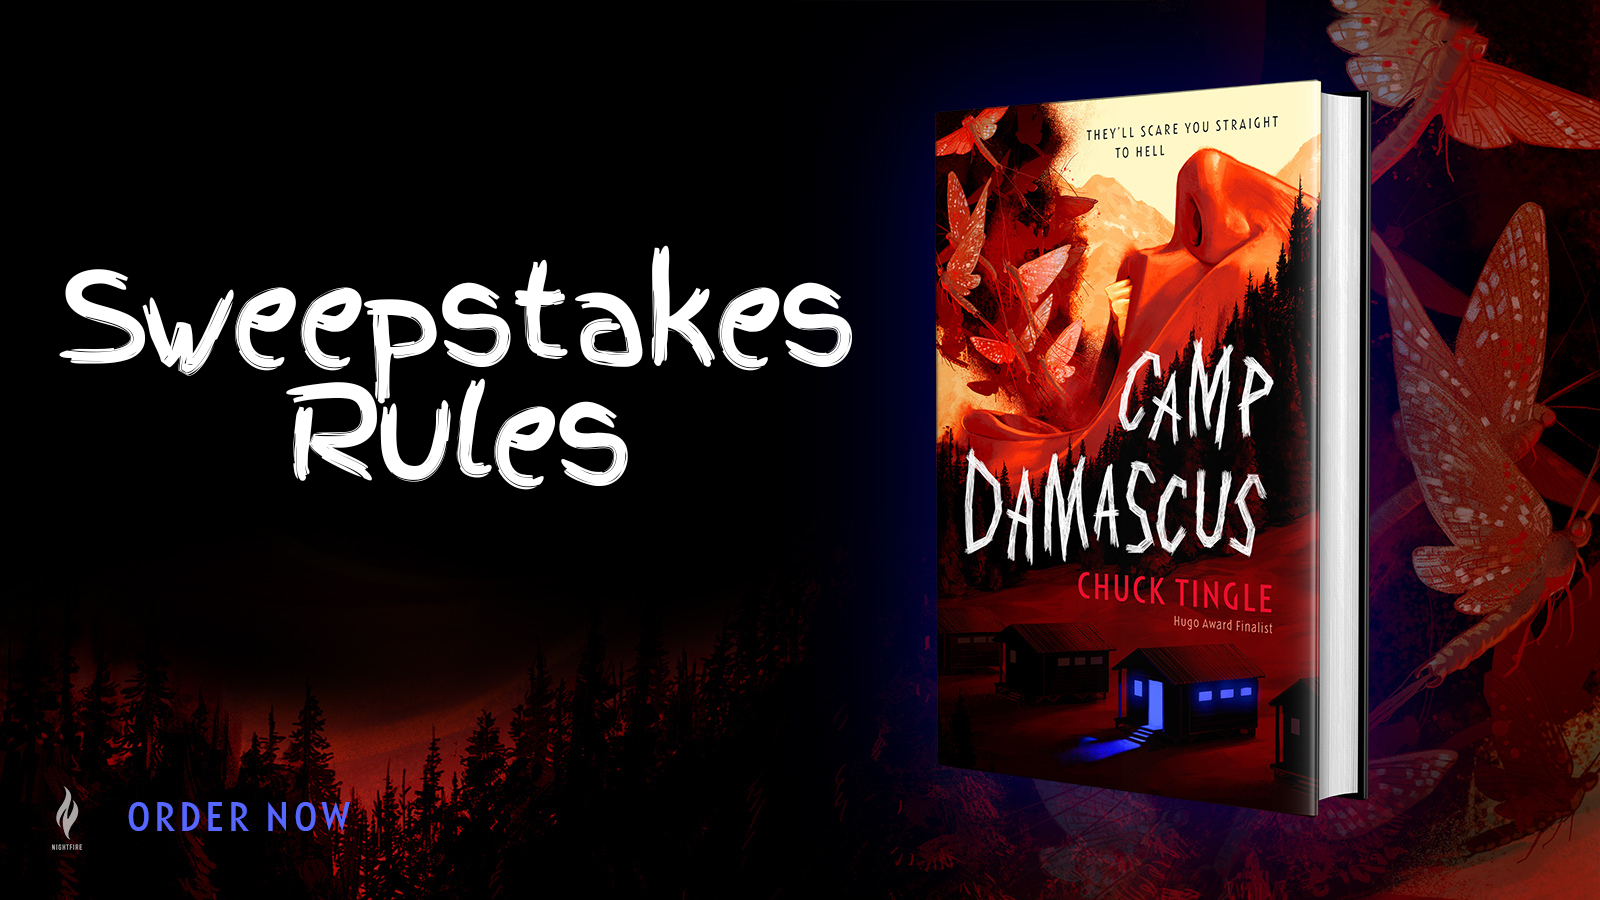 Camp Damascus Sweepstakes Rules - 315